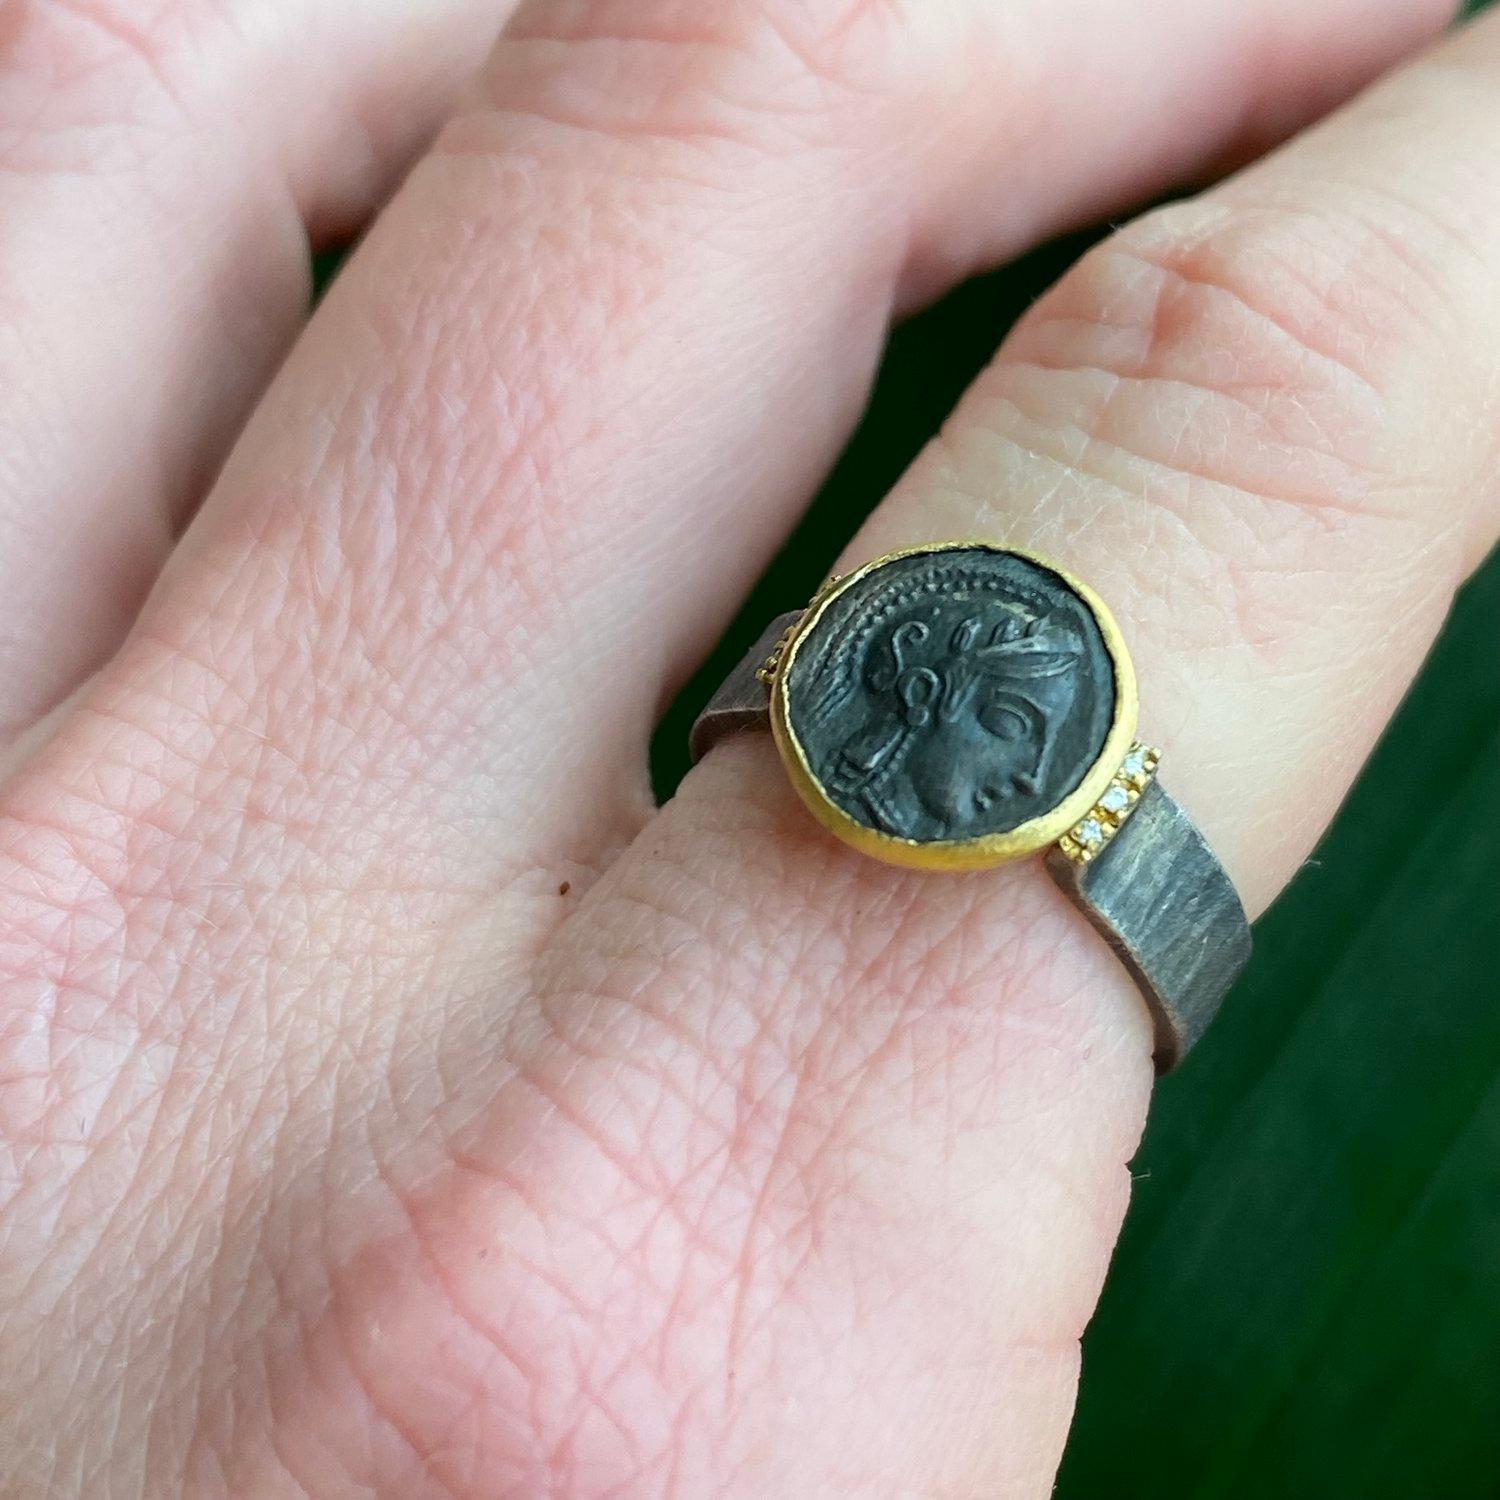 Athena Head Ring, with side Diamonds, Goddess of Wisdom and War, 24K Gold + Silver, Handmade in Istanbul // Athena is the Olympian goddess of wisdom and war and the adored patroness of the city of Athens. A virgin deity, she was also – somewhat